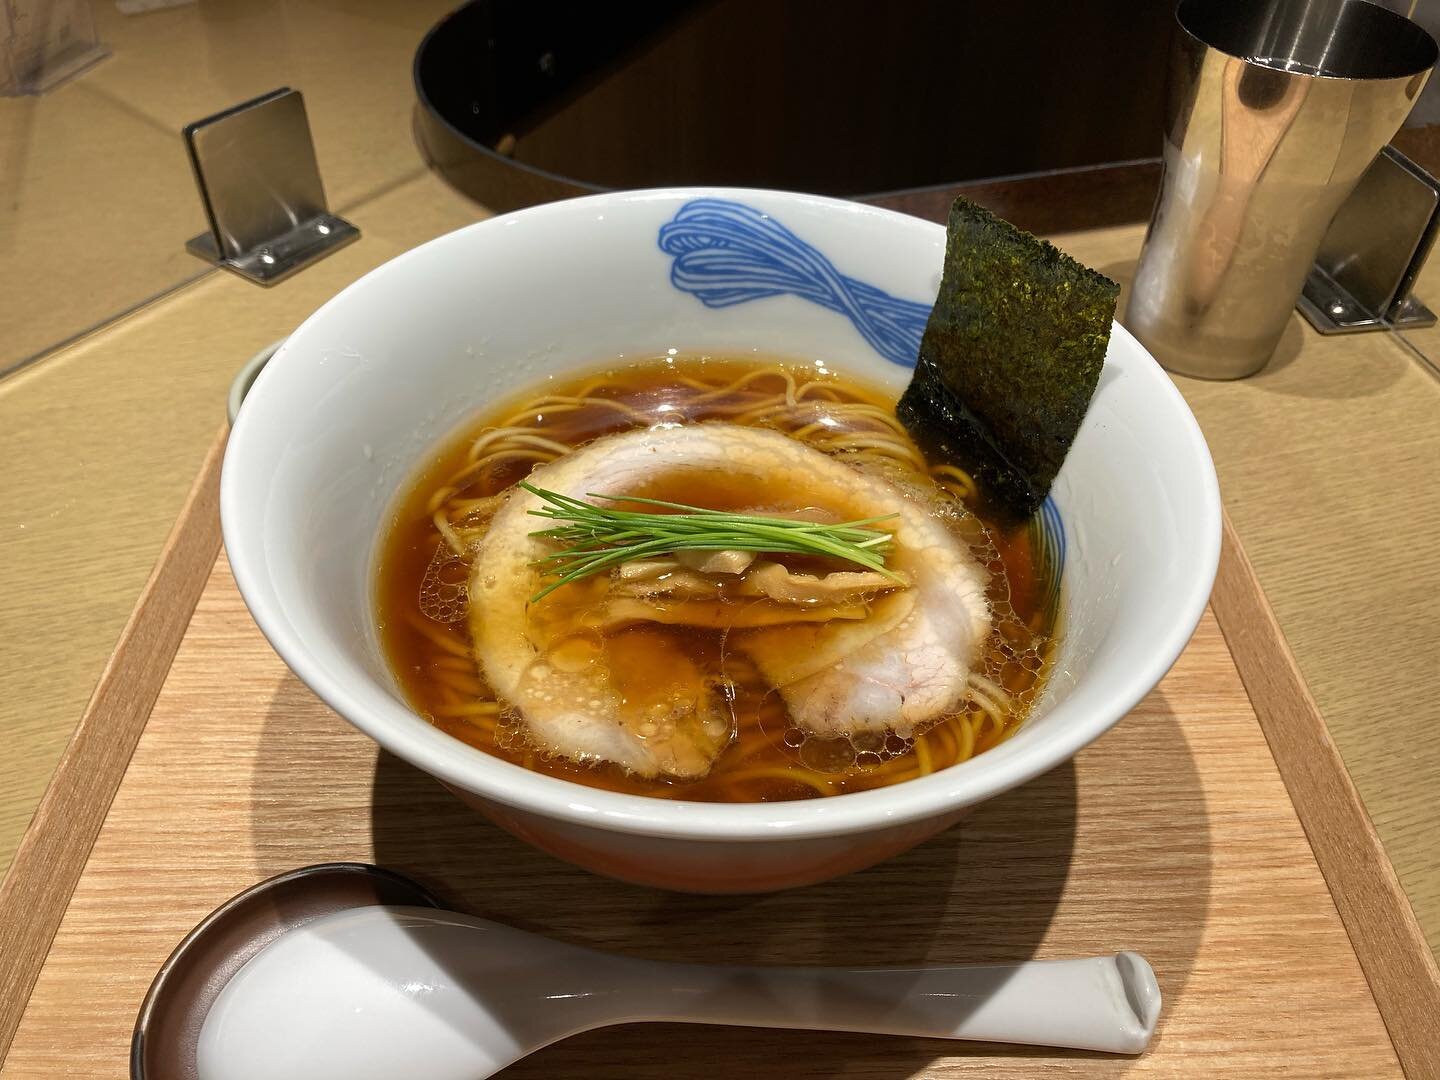 Shoyu Ramen at Nippon Ramen Rin inside of JR Tokyo Station.
This ramen shop serves great ramen inside of the gates of JR Tokyo Station, which means you can eat here without leaving the gates of the station. Very convenient if you&rsquo;re transferrin